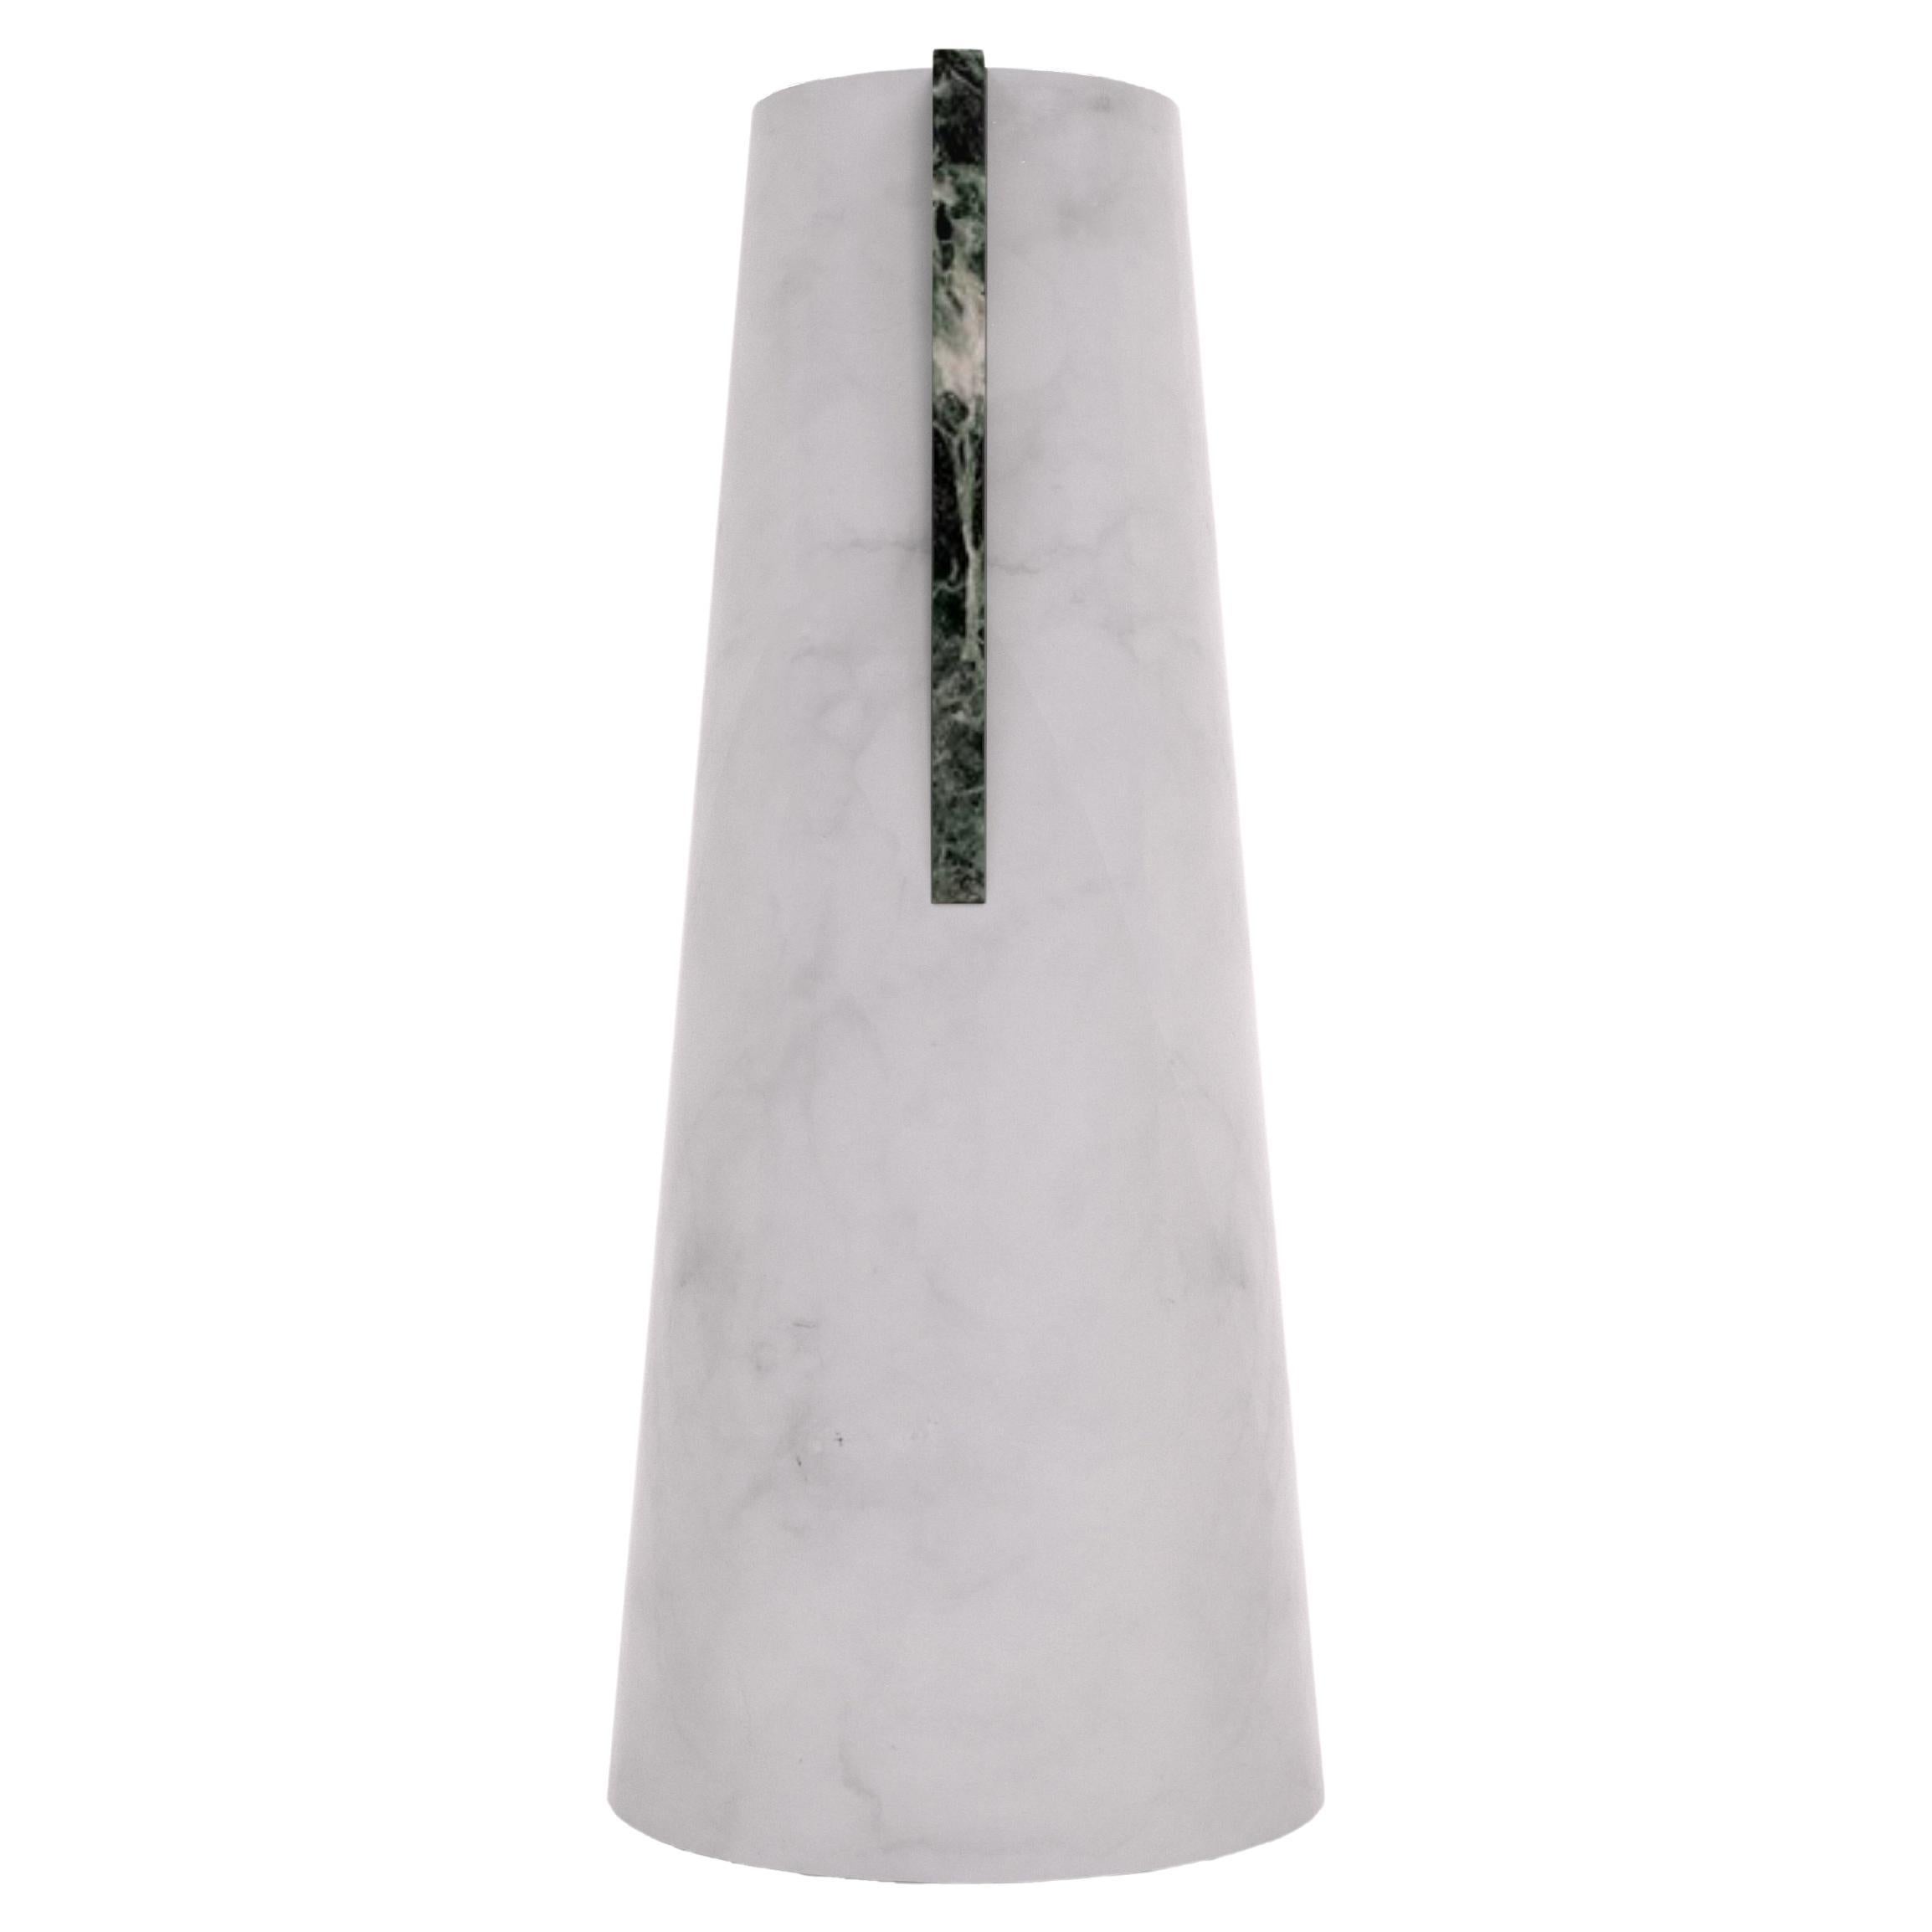 White Carrara marble and Verde Alpi marble flower vase by Carcino Design